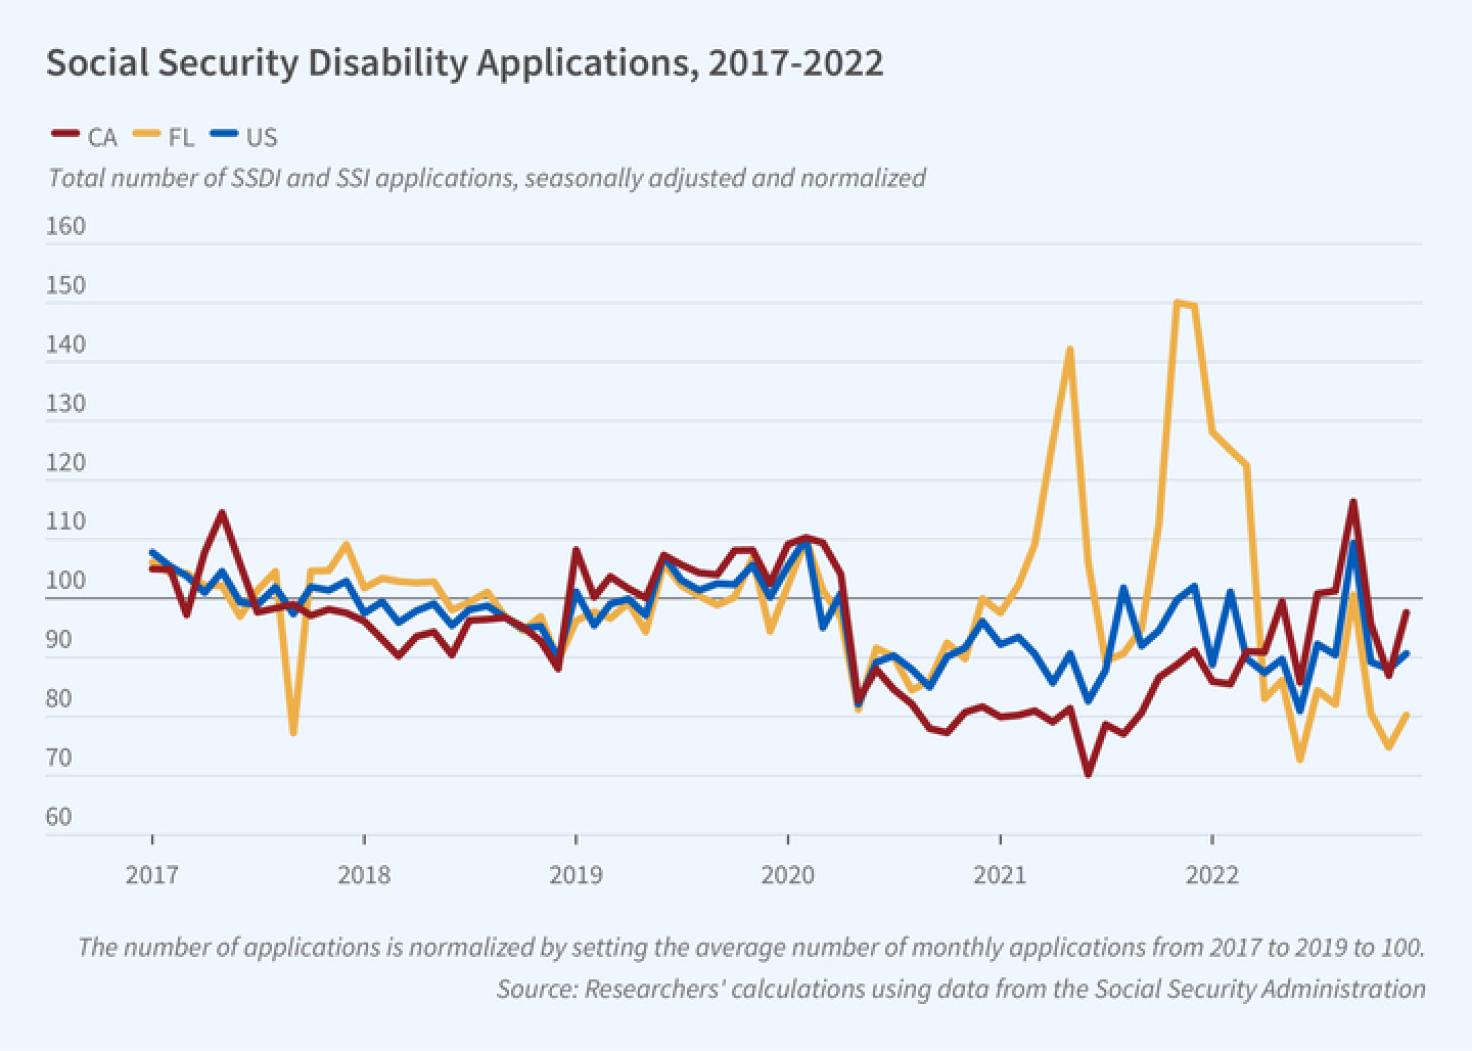 Inter-state Variation in Disability Applications during the Pandemic figure